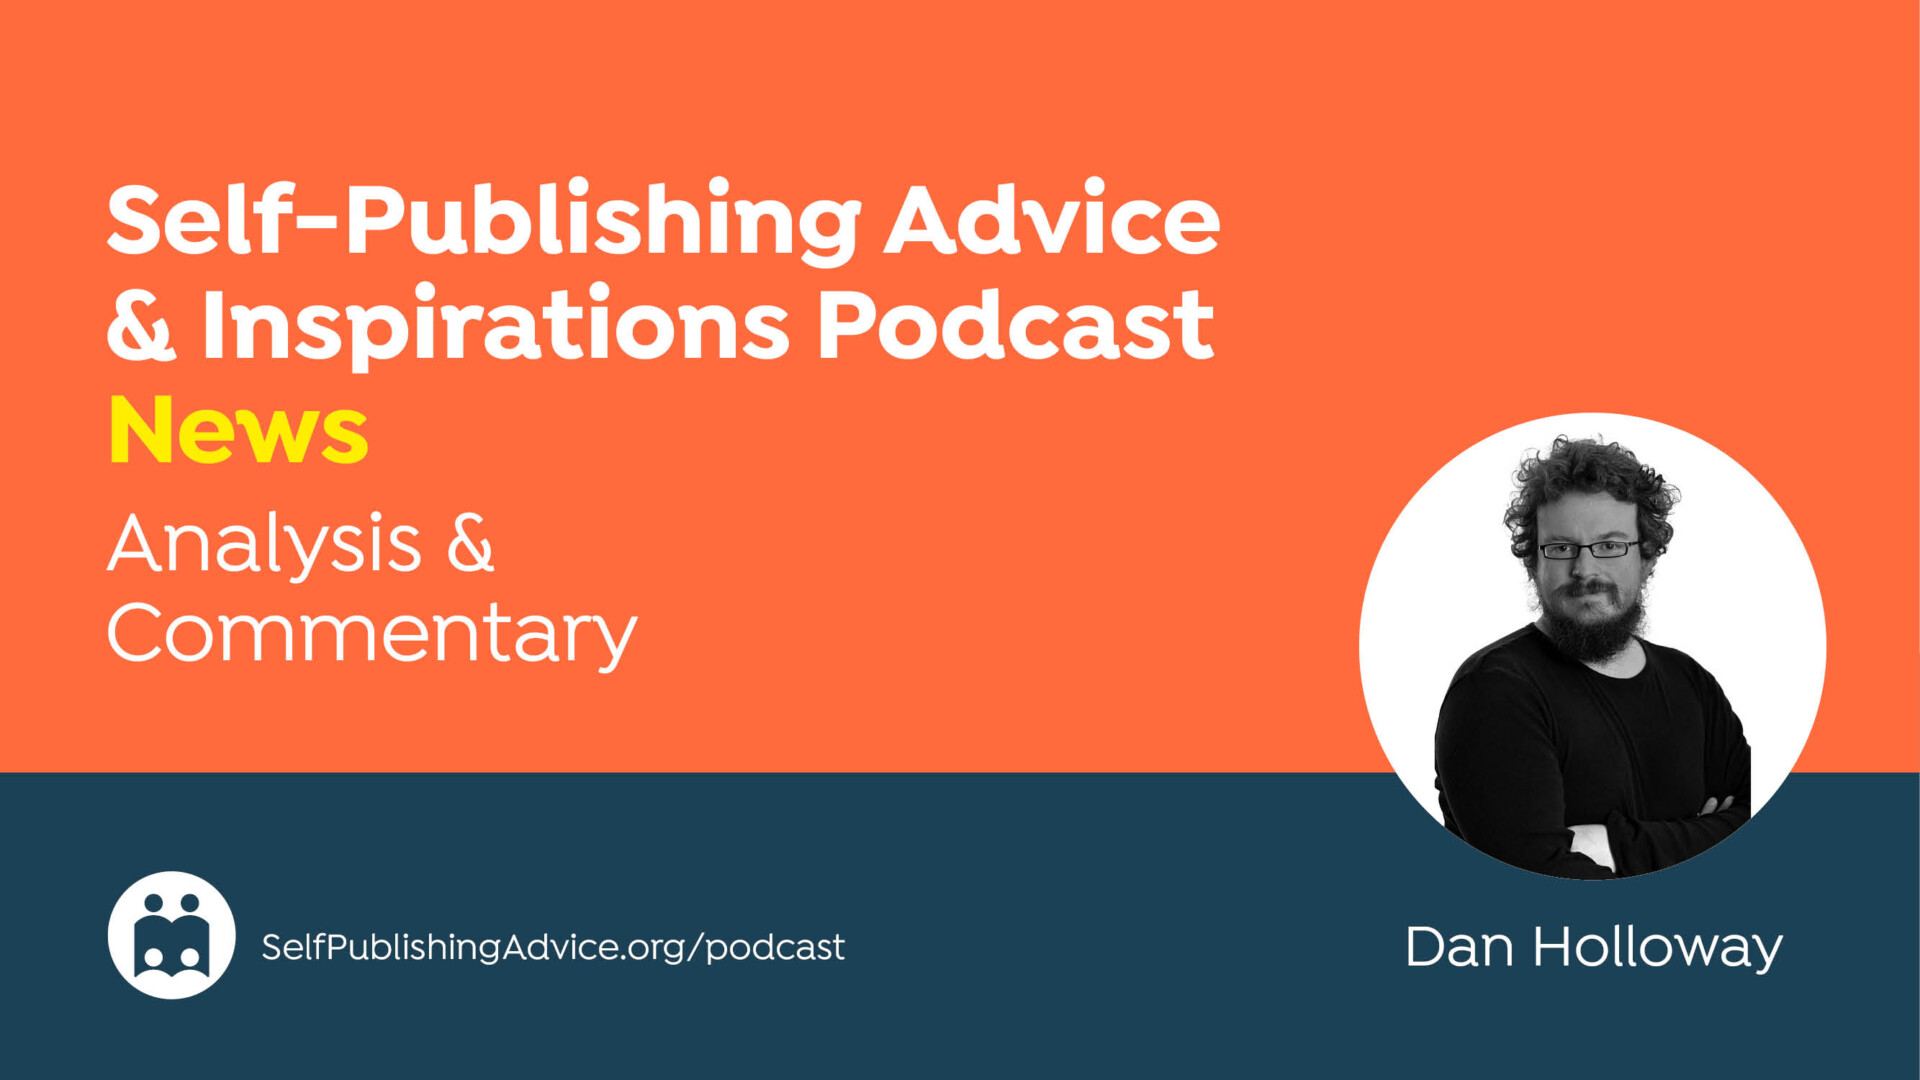 Amazon Launches New AI Policy: Self-Publishing News Podcast With Dan Holloway